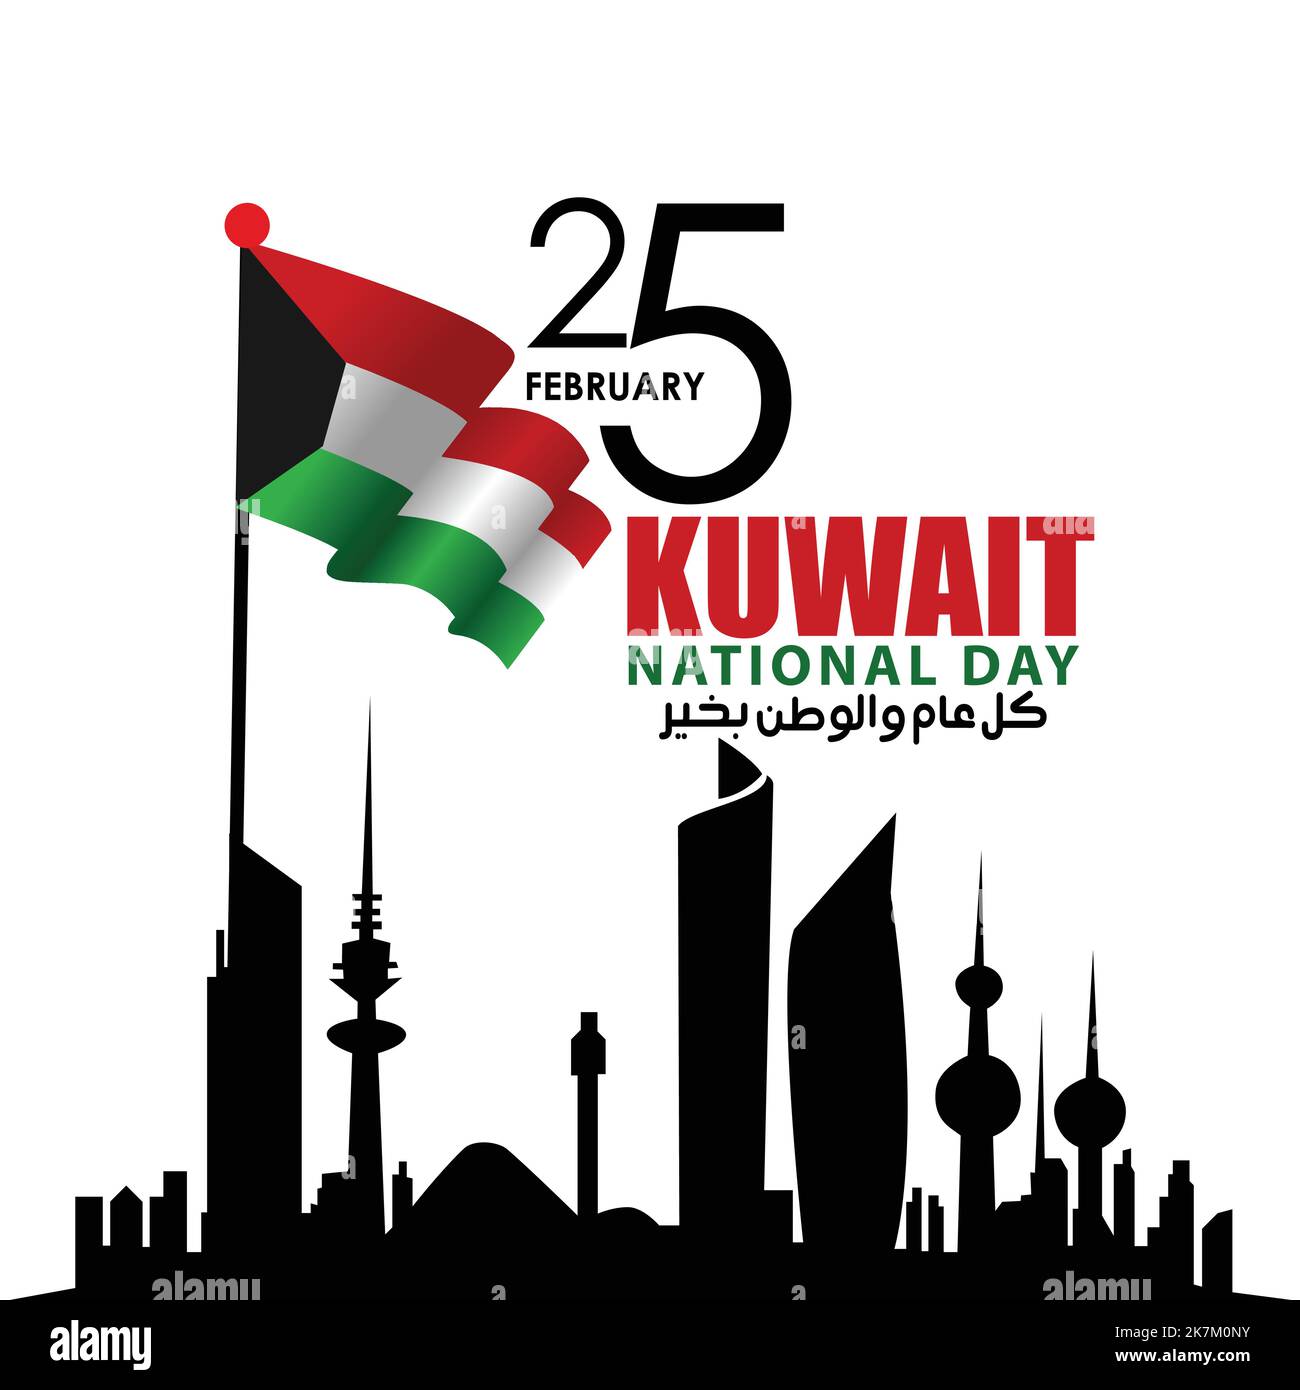 kuwait national day 25 february creative typography with vector buildings and kuwait flag. Stock Vector